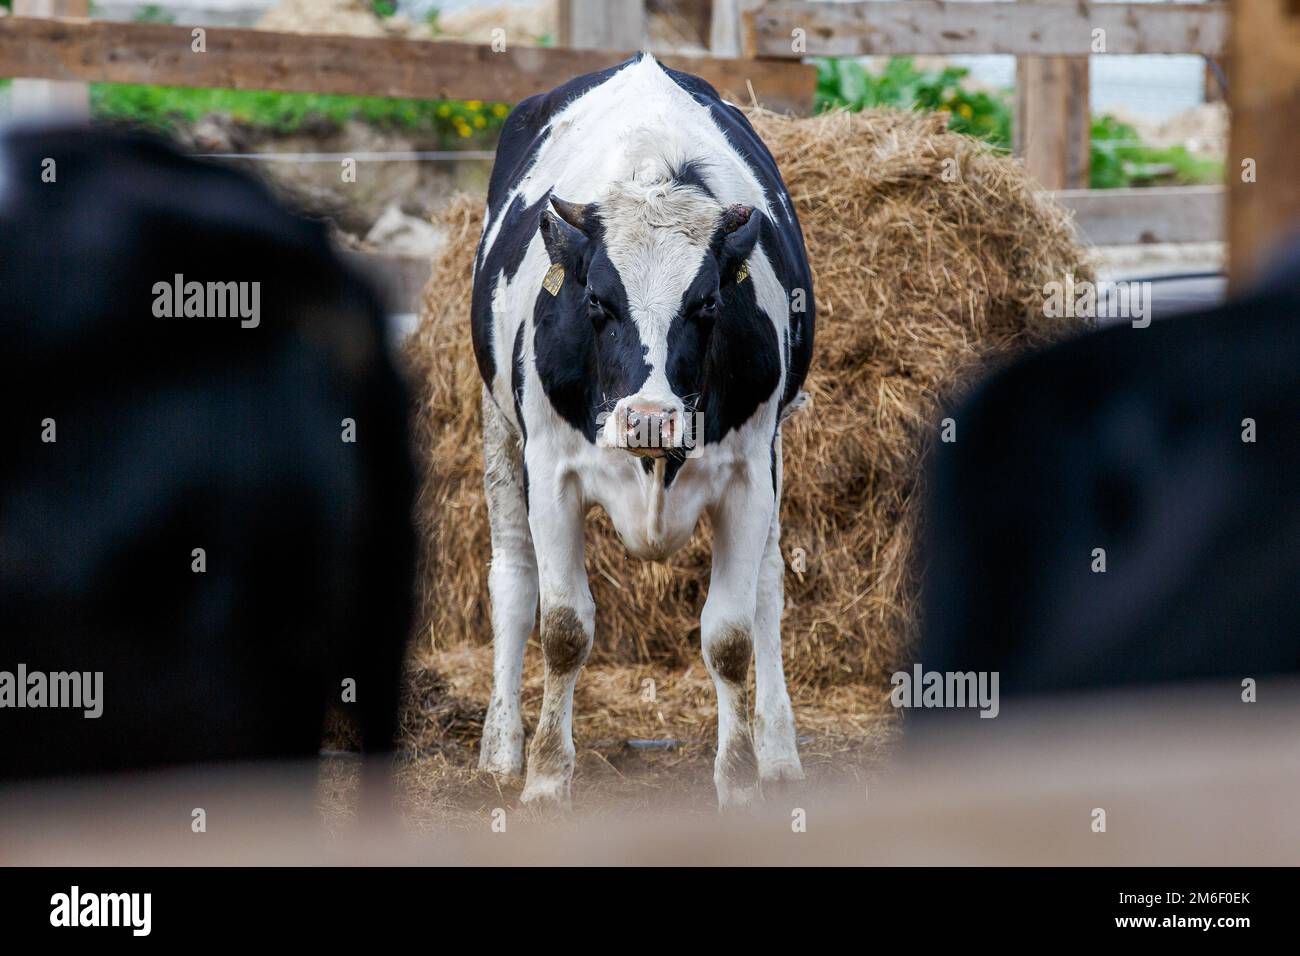 Livestock farm. Close-up. Black and white cow stands in the pasture against the background of hay and looks at the camera Stock Photo